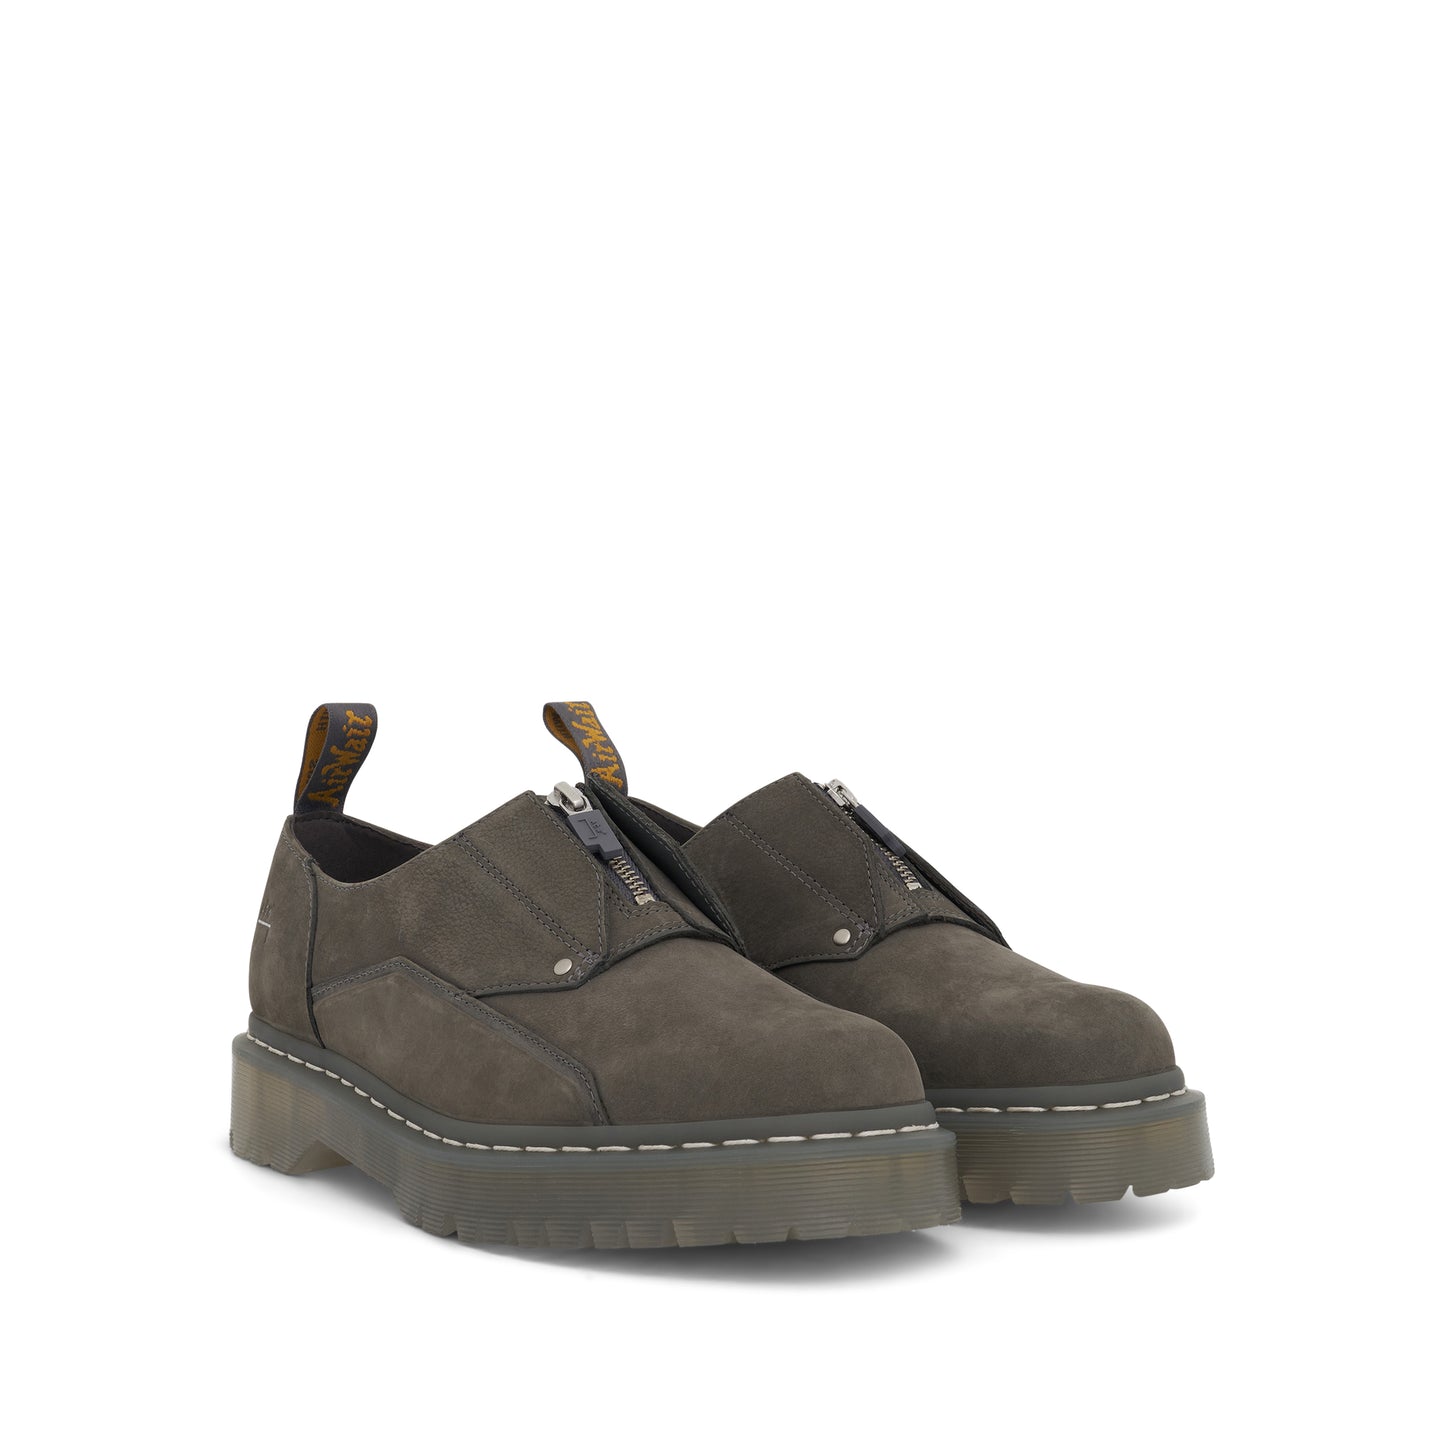 ACW x Dr Martens 1461 Bex Low Shoes in Mid Grey